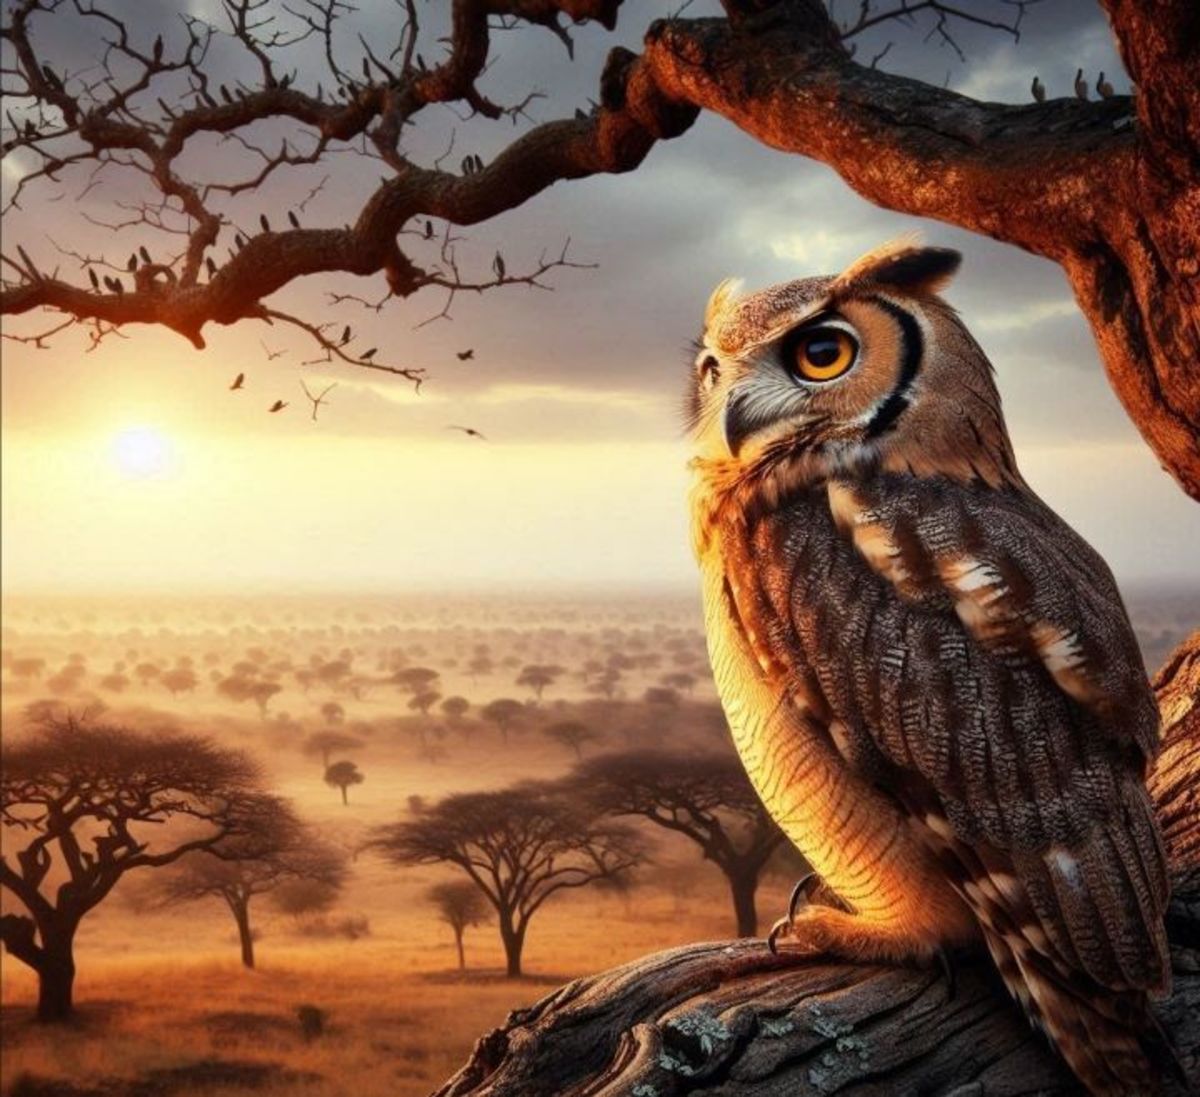 The Enigma of the Wise Owl